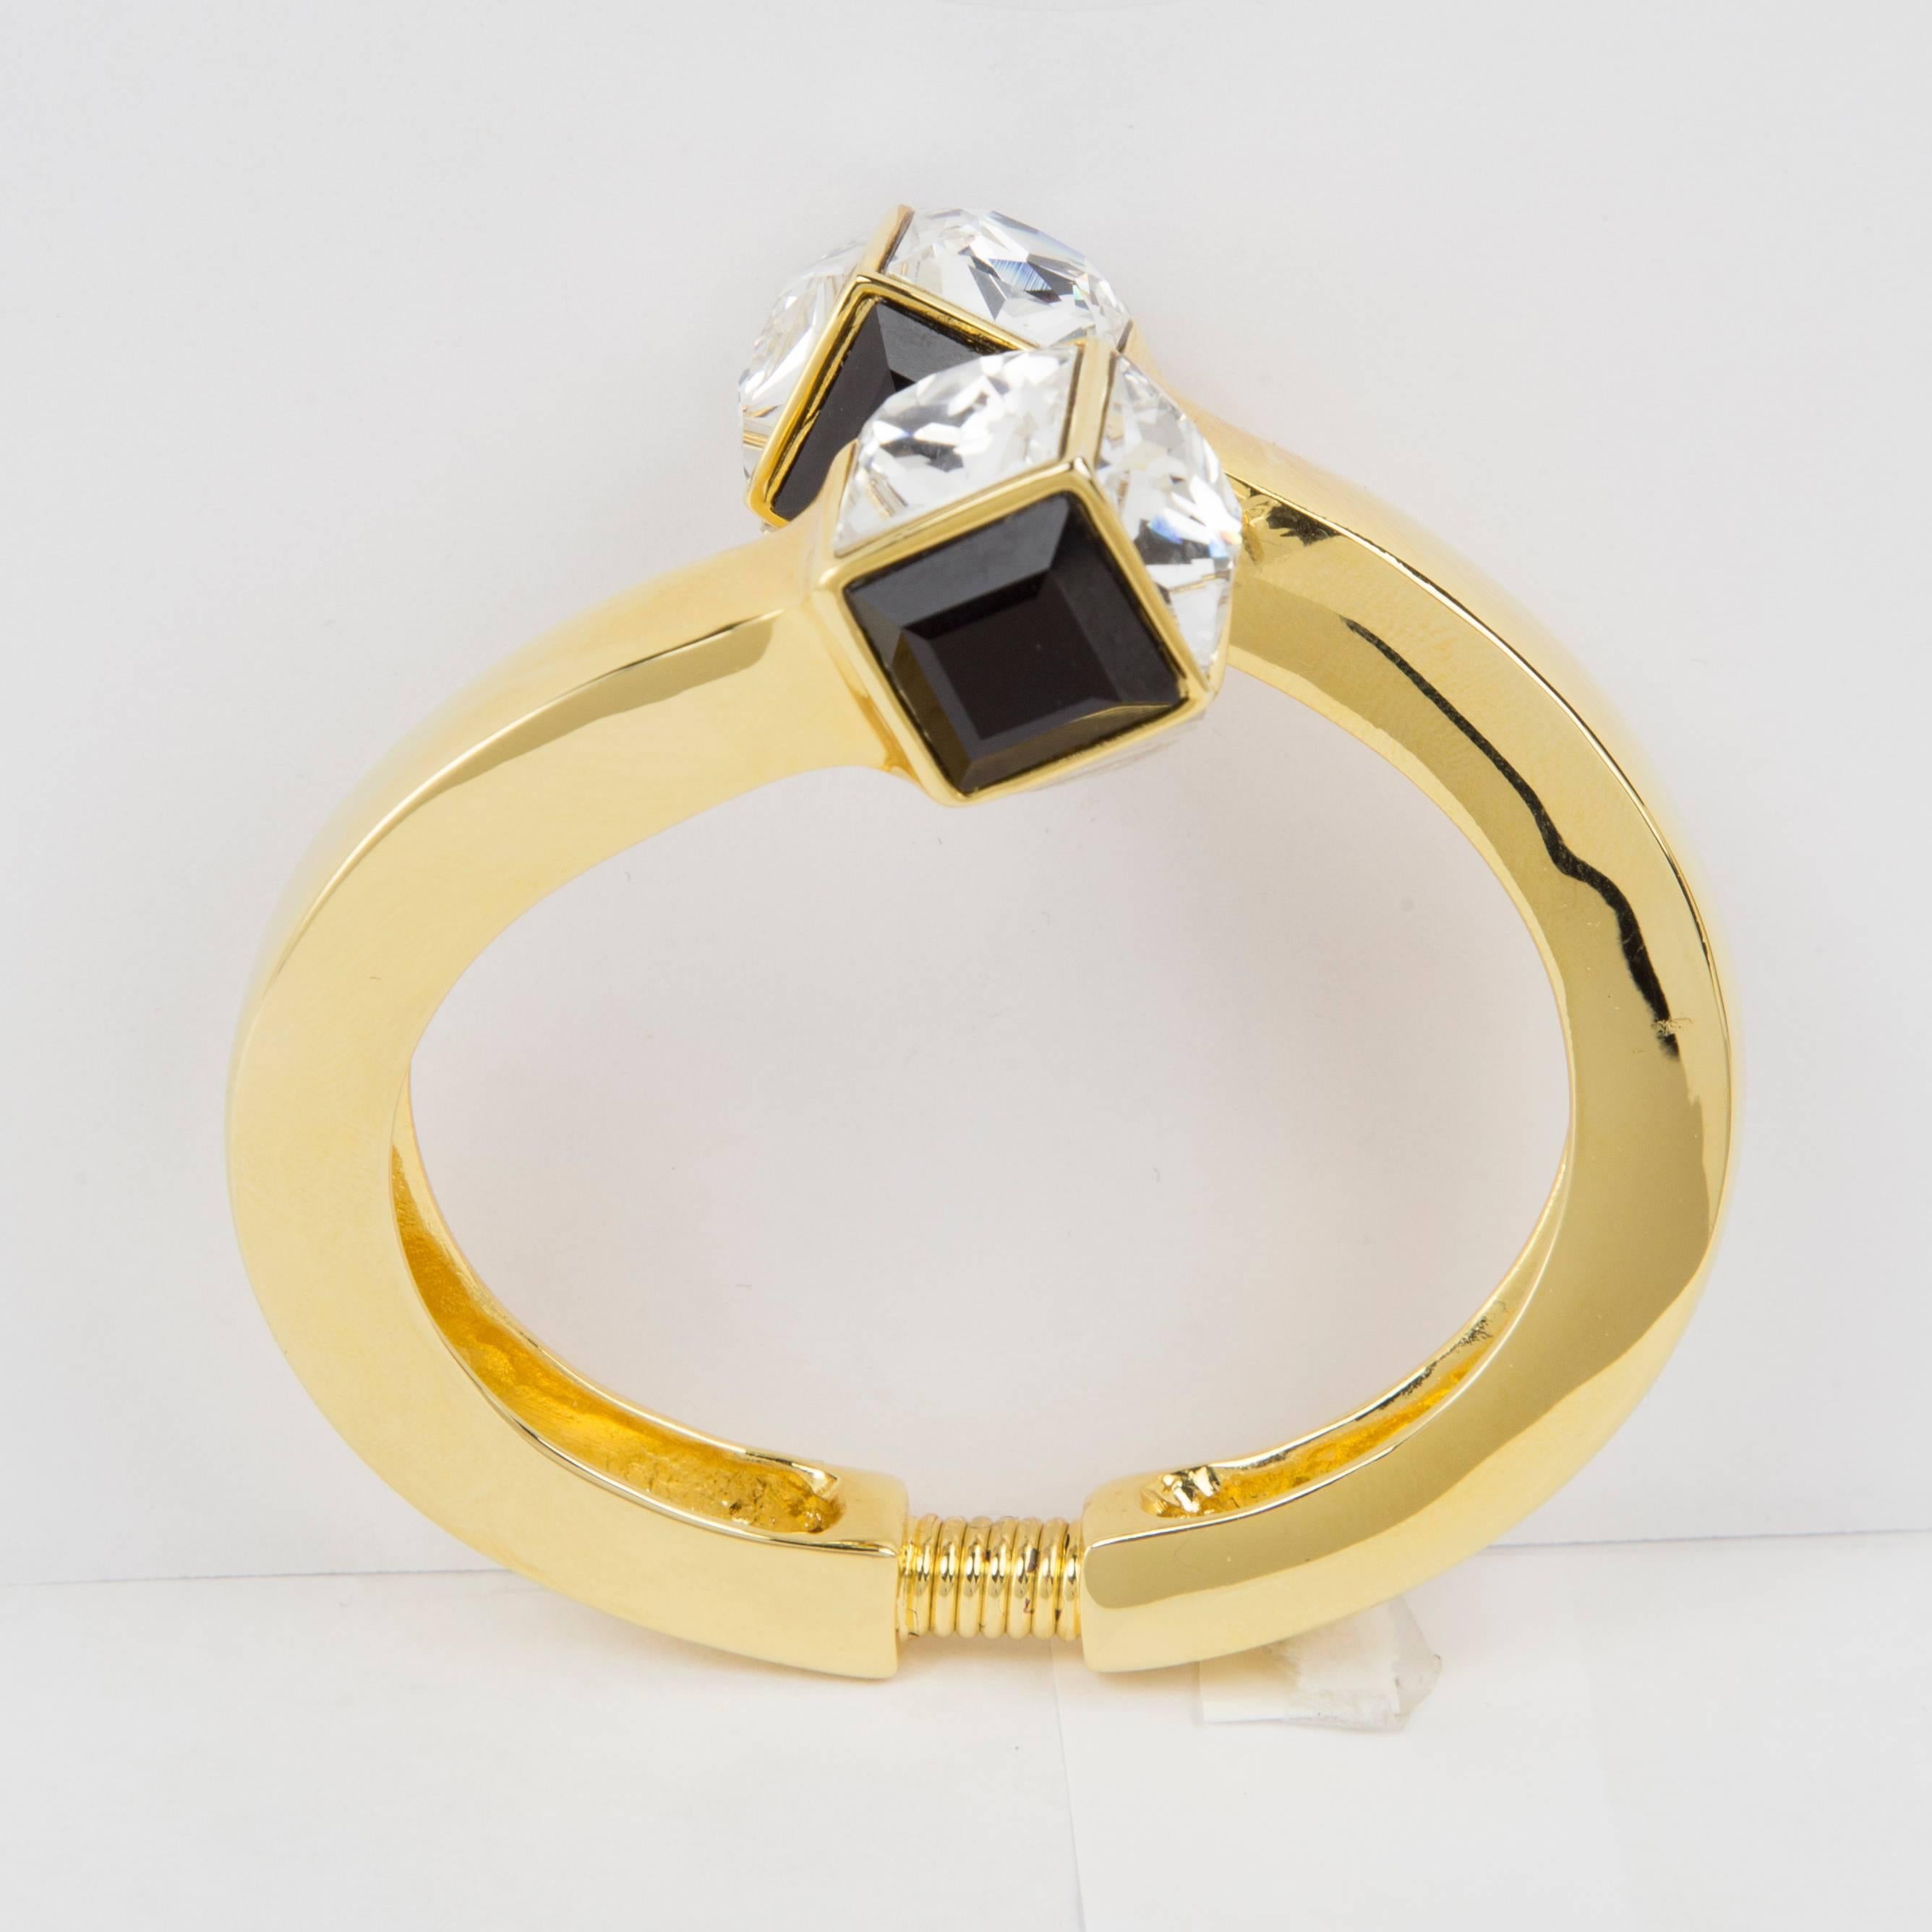 Stunning Kenneth Jay Lane Crossover Cuff Bracelet set with Sparkling Square Black and Clear Faux Diamonds; signed: KJL; approx. interior dimensions: 2.25” x 1.88”; Signed: KJL. Never worn. Outstanding...Add Pizazz to any Outfit!
